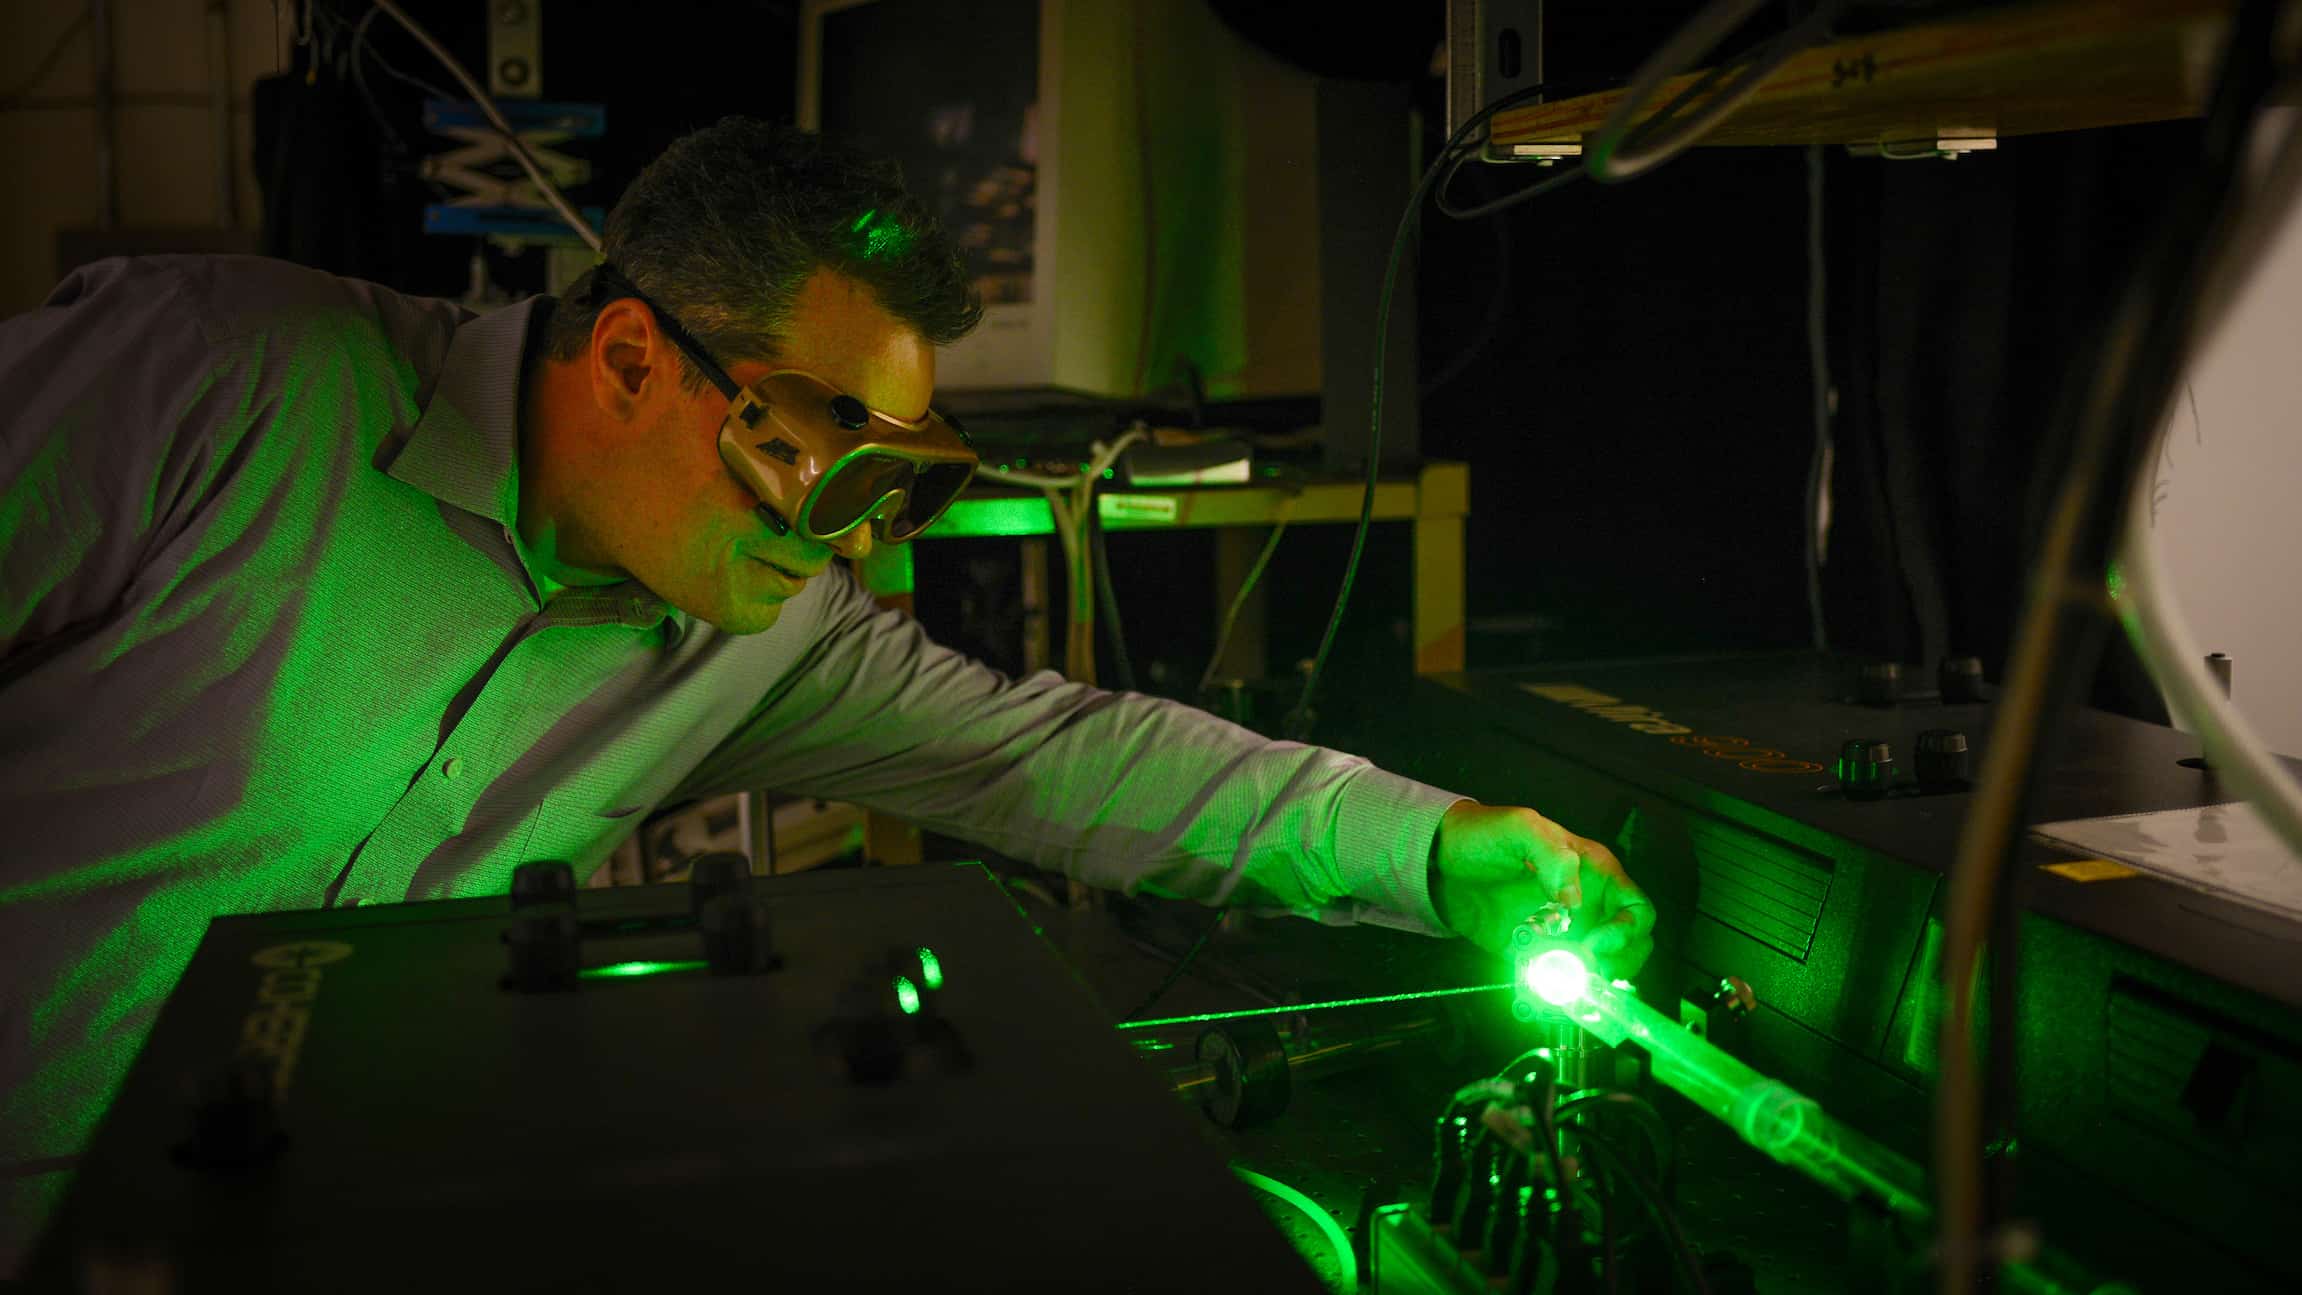 Phil Castellano working with lasers in his lab